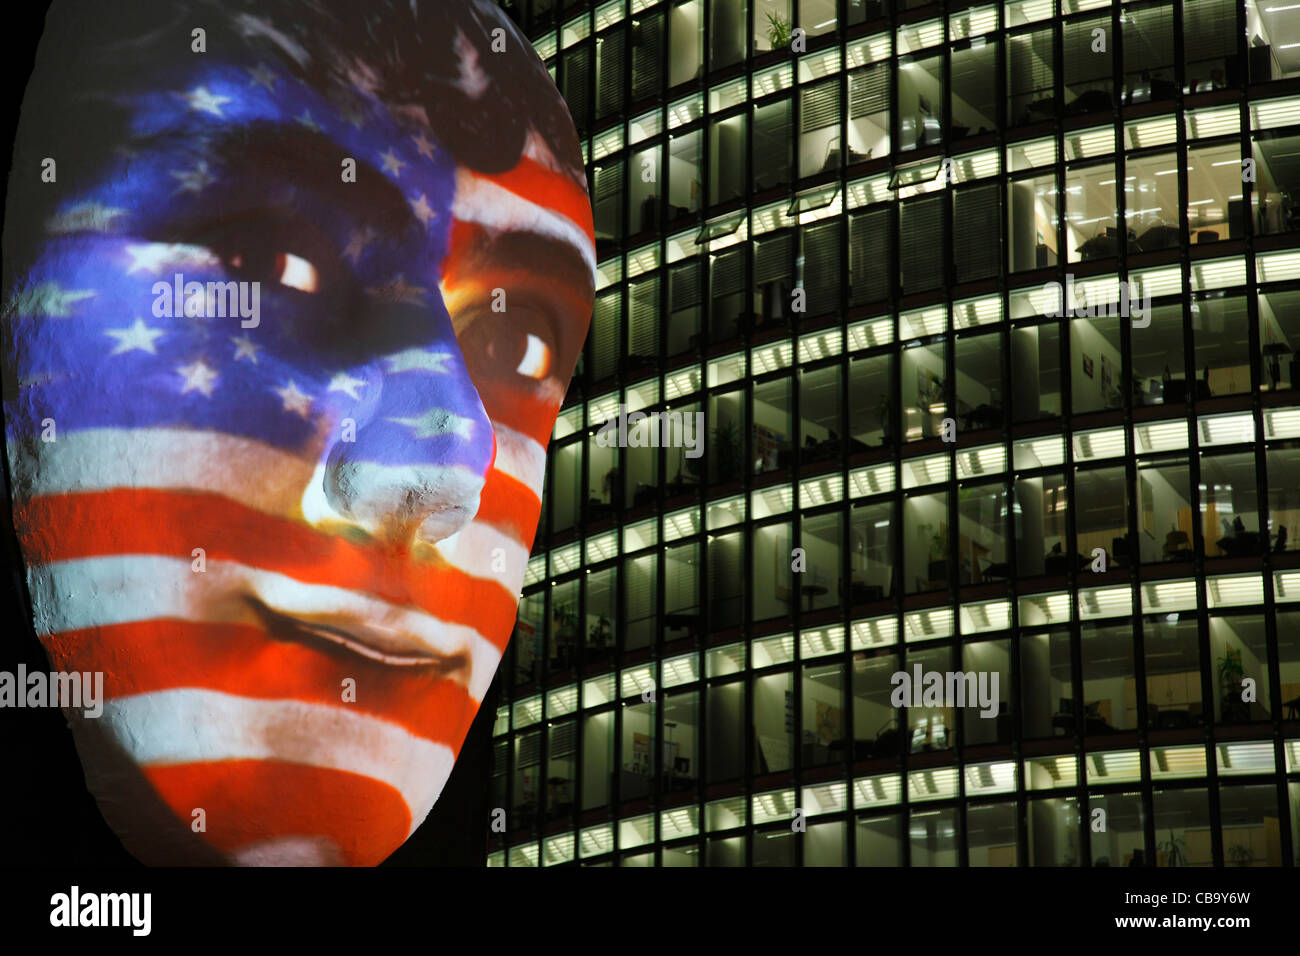 Huge sculpture of a face illuminated by an image of an US flag painted face during festival of lights 2011 in Berlin Stock Photo